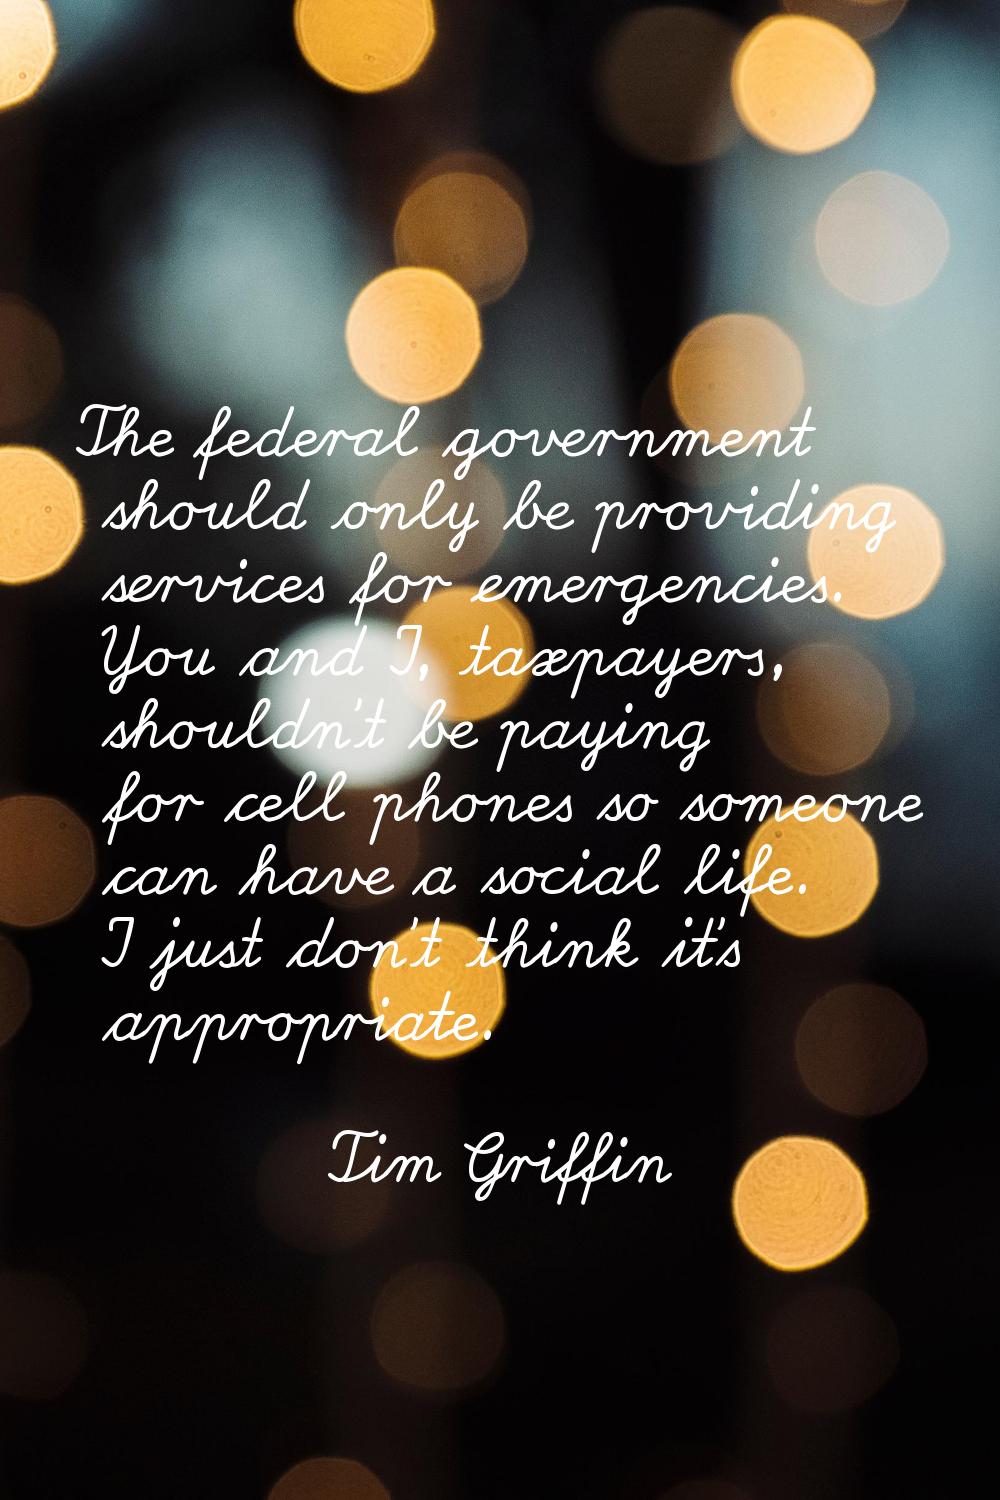 The federal government should only be providing services for emergencies. You and I, taxpayers, sho